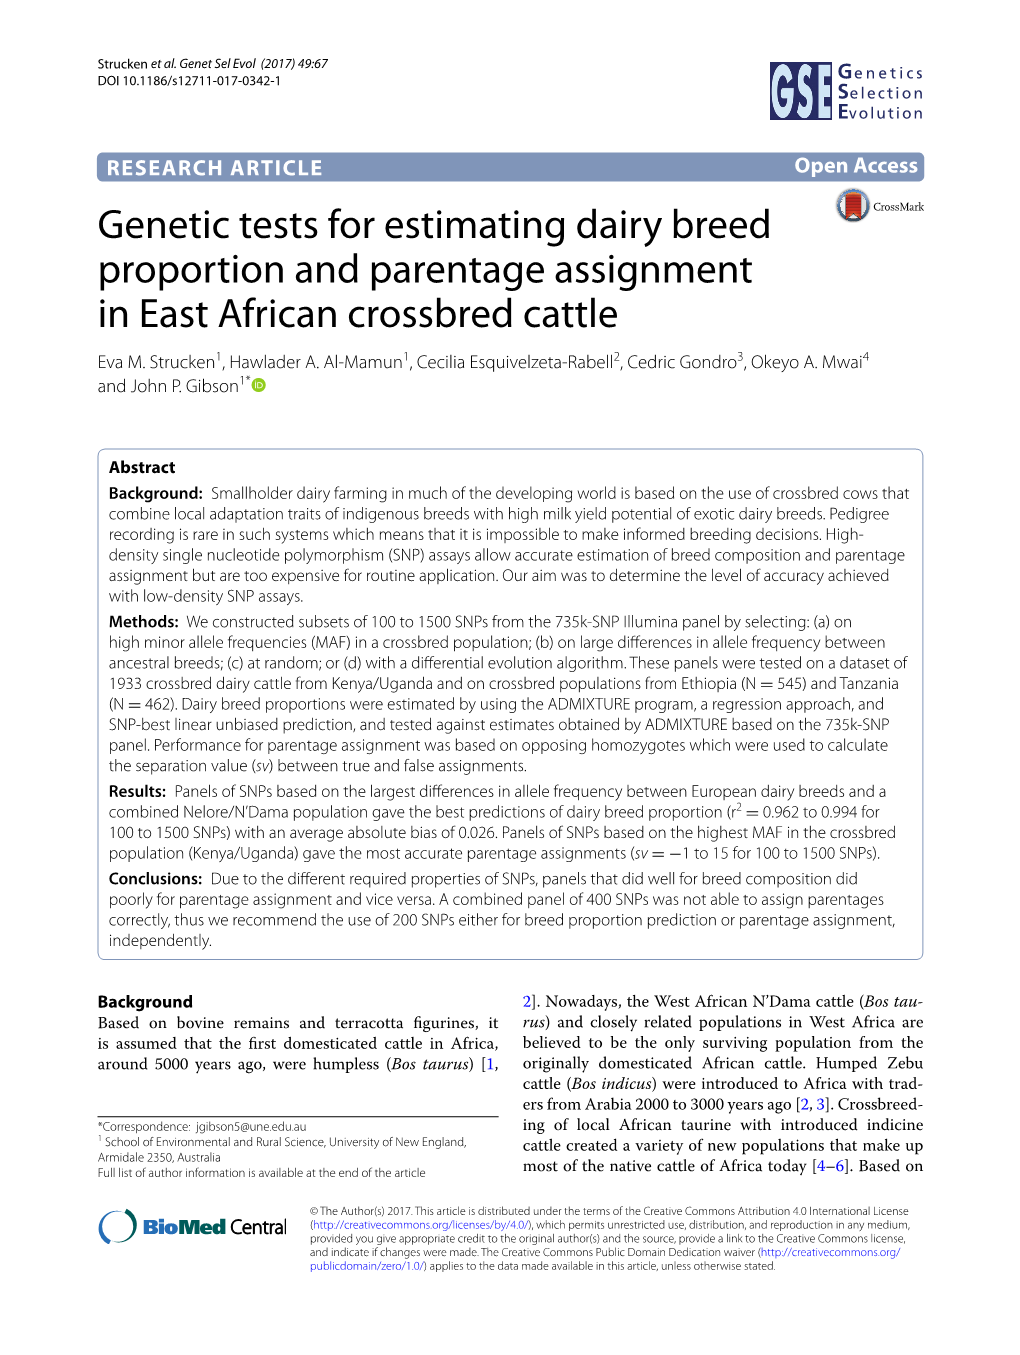 Genetic Tests for Estimating Dairy Breed Proportion and Parentage Assignment in East African Crossbred Cattle Eva M